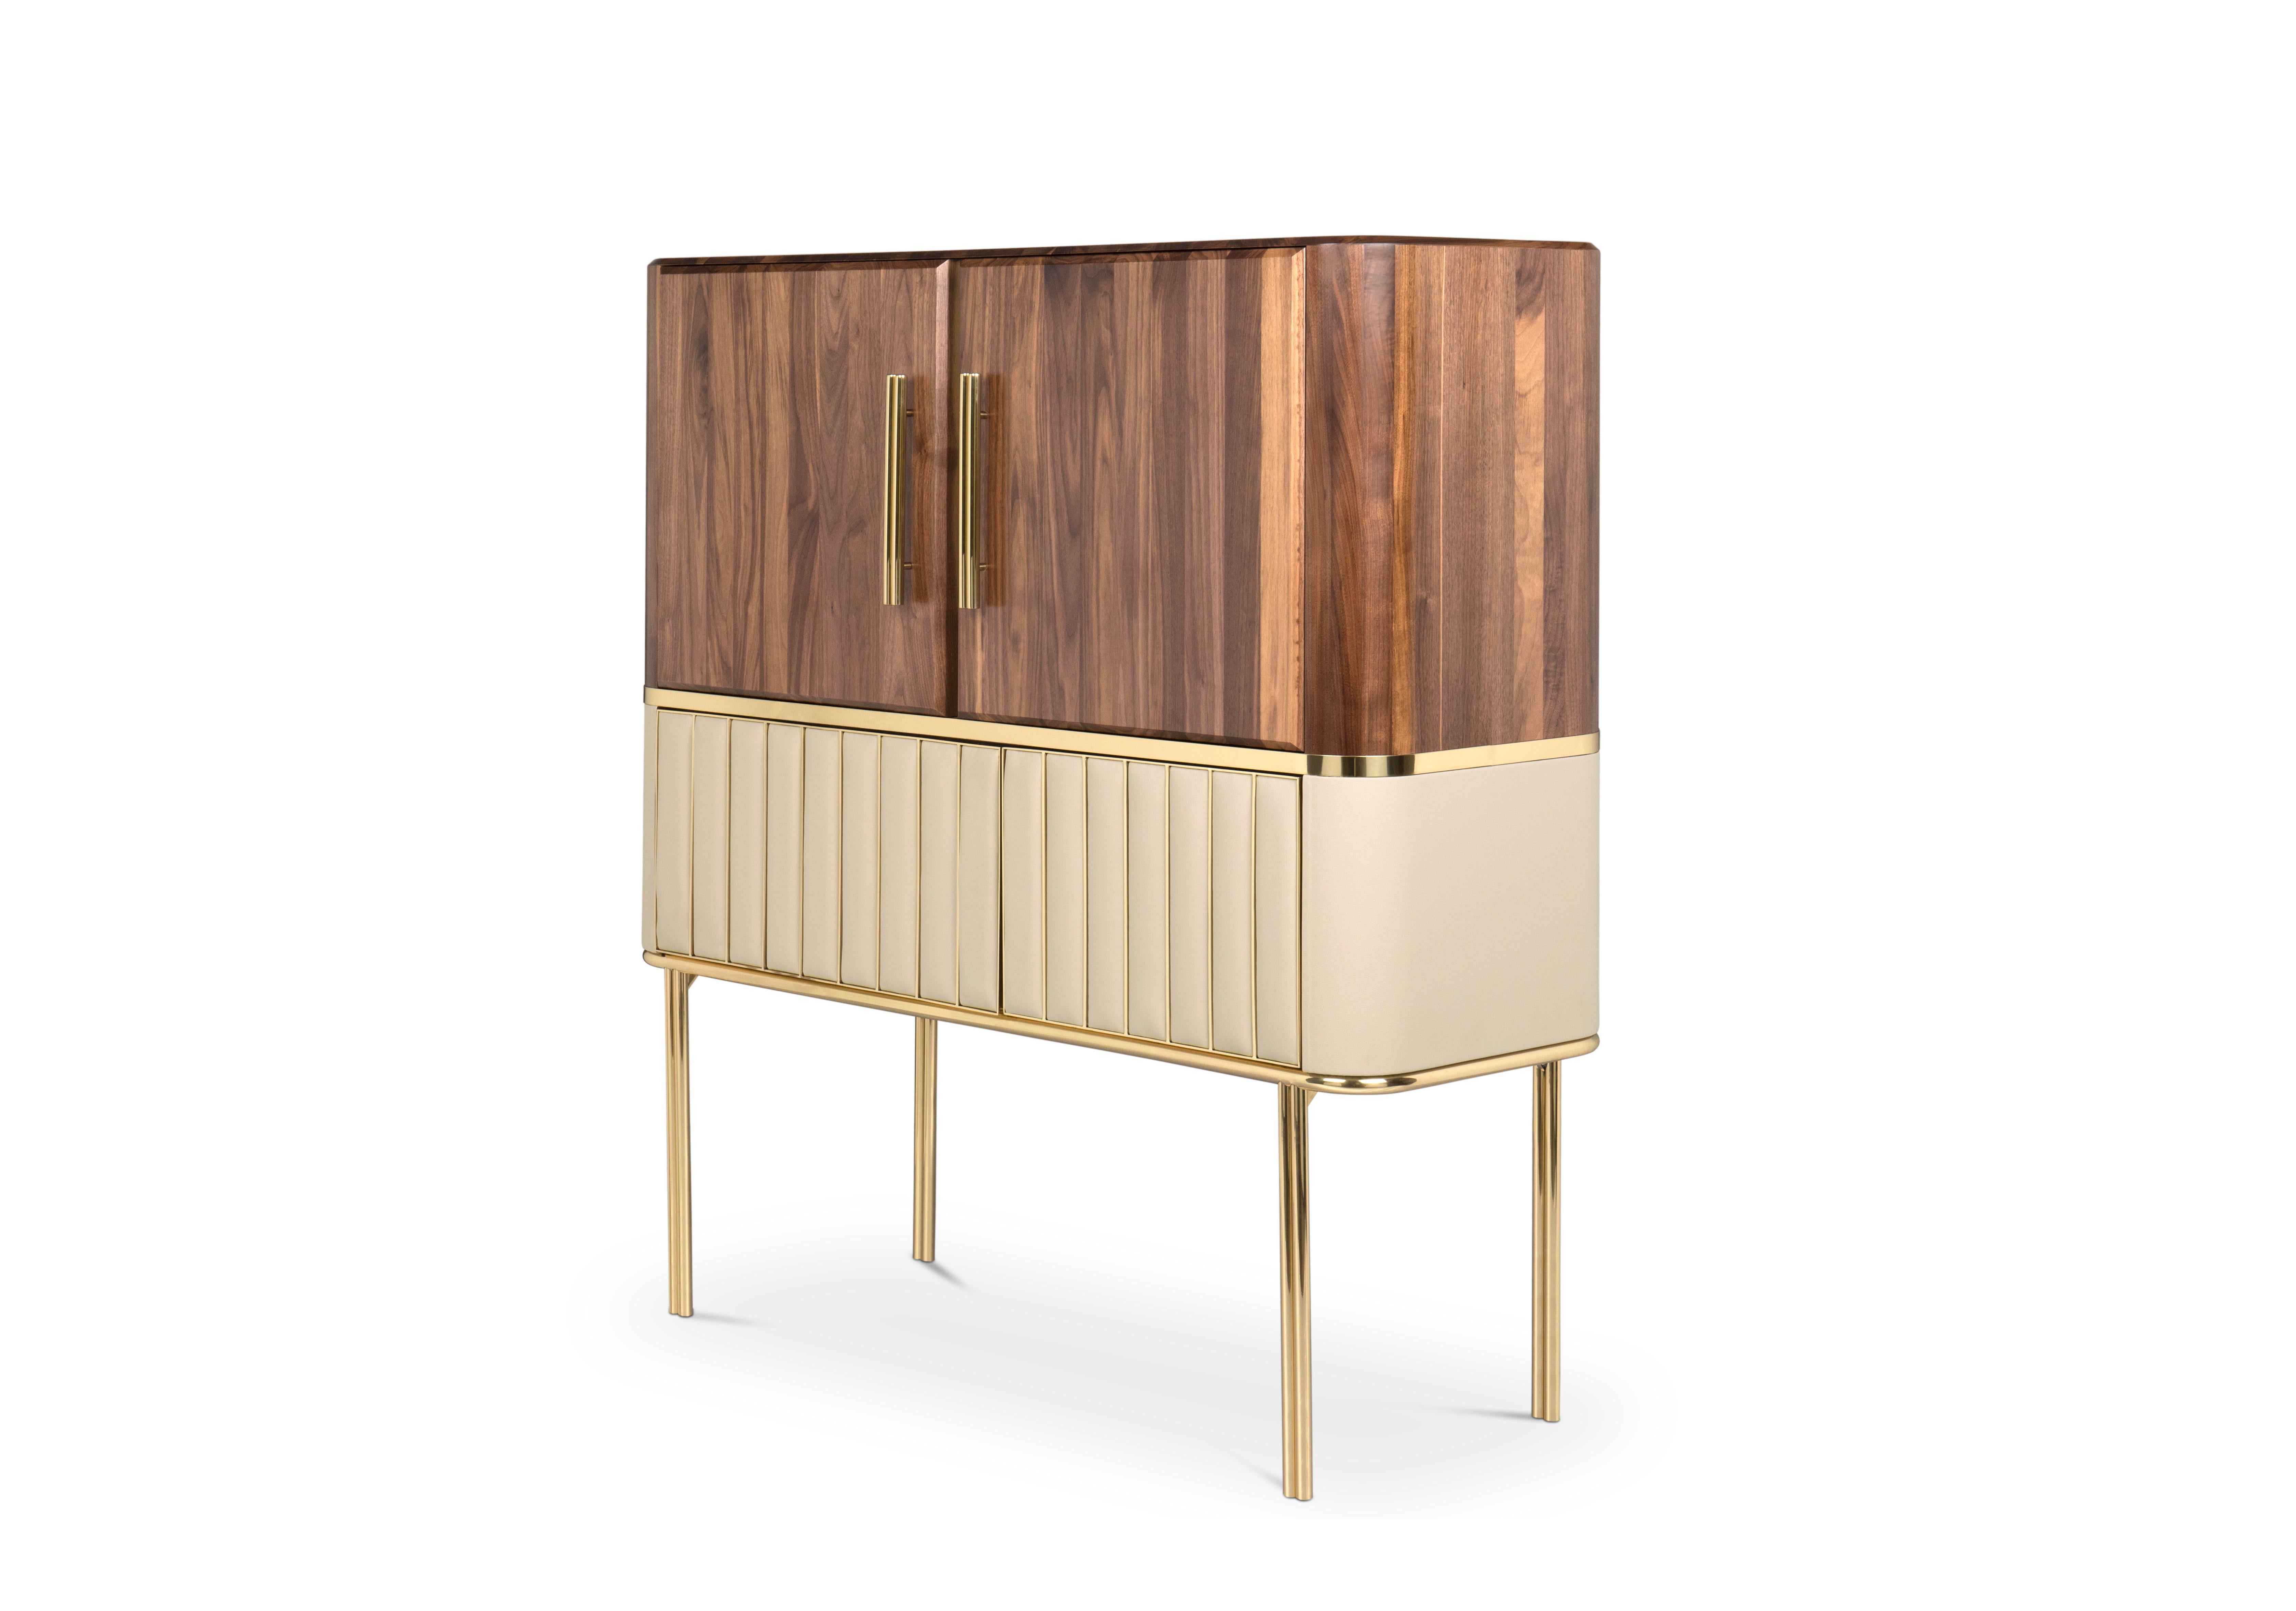 Inspired by one of the most refined names in the Hollywood industry, Essential Home created Hepburn cabinet. With a body handmade in walnut and two door handles made of polished brass, this mid-century modern cabinet stands out thanks to its leather